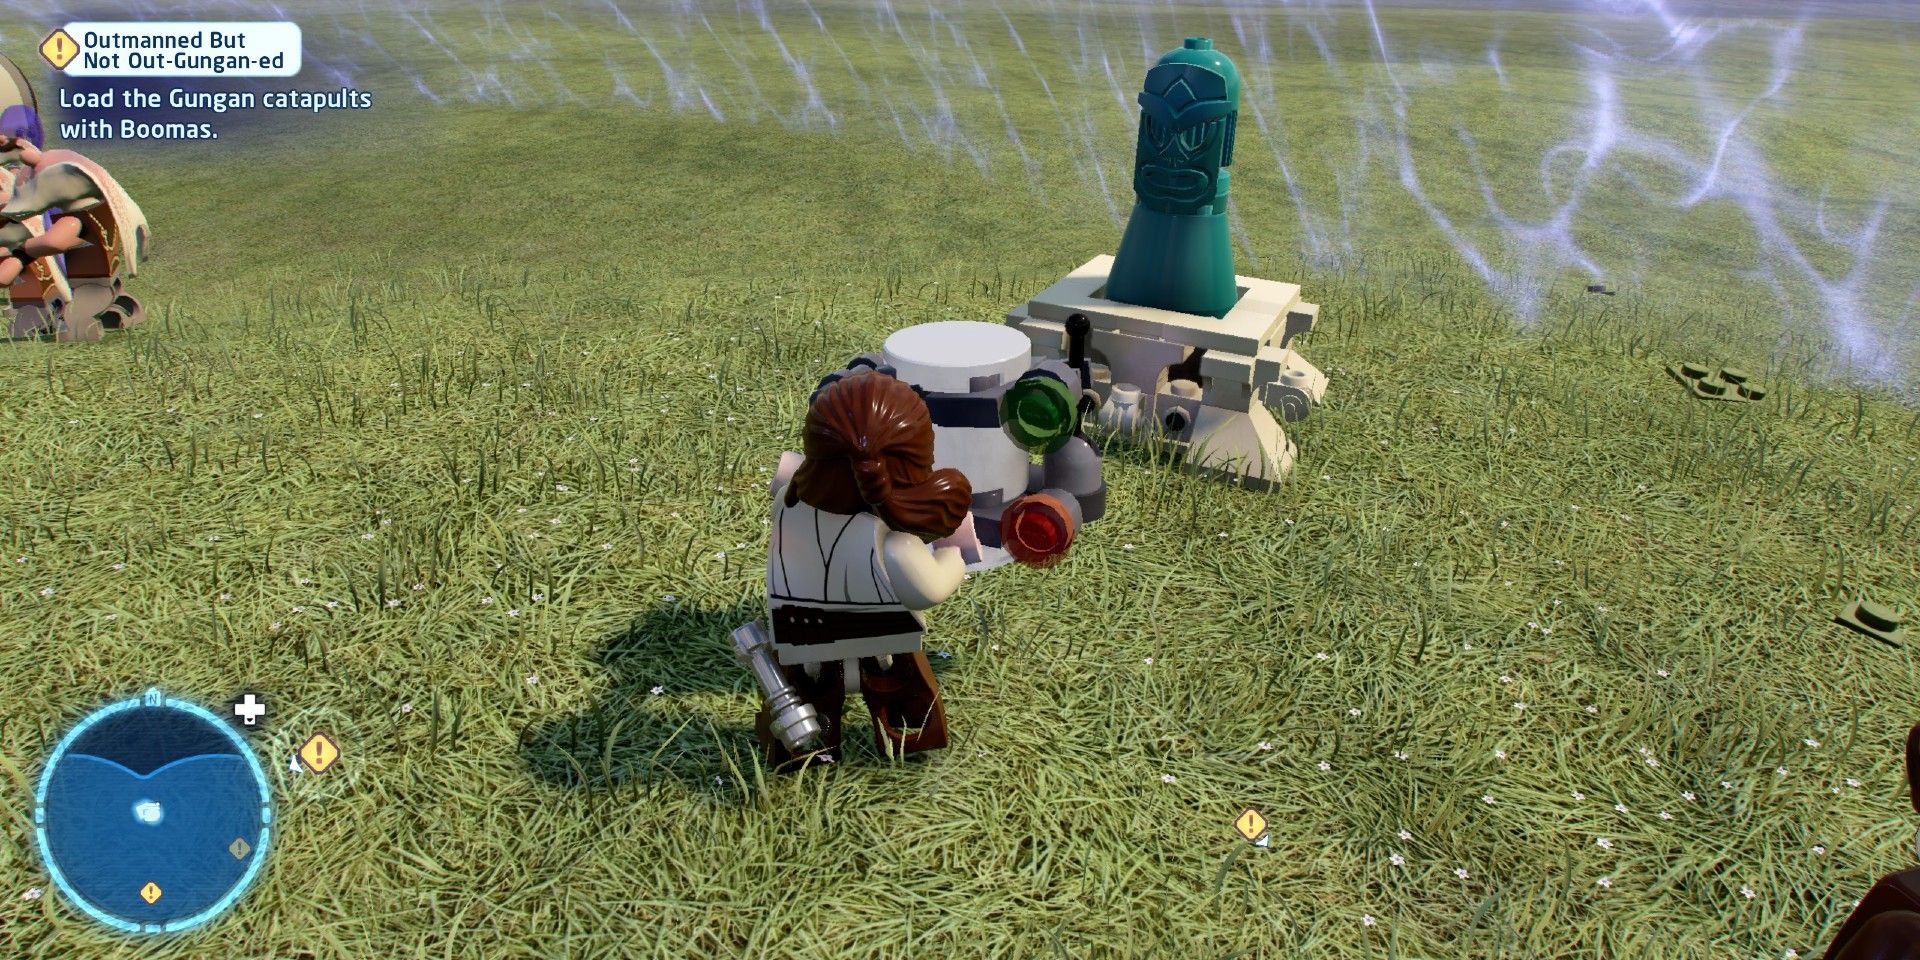 LEGO Star Wars: Outmanned But Not Out-Gungan-Ed Minikits